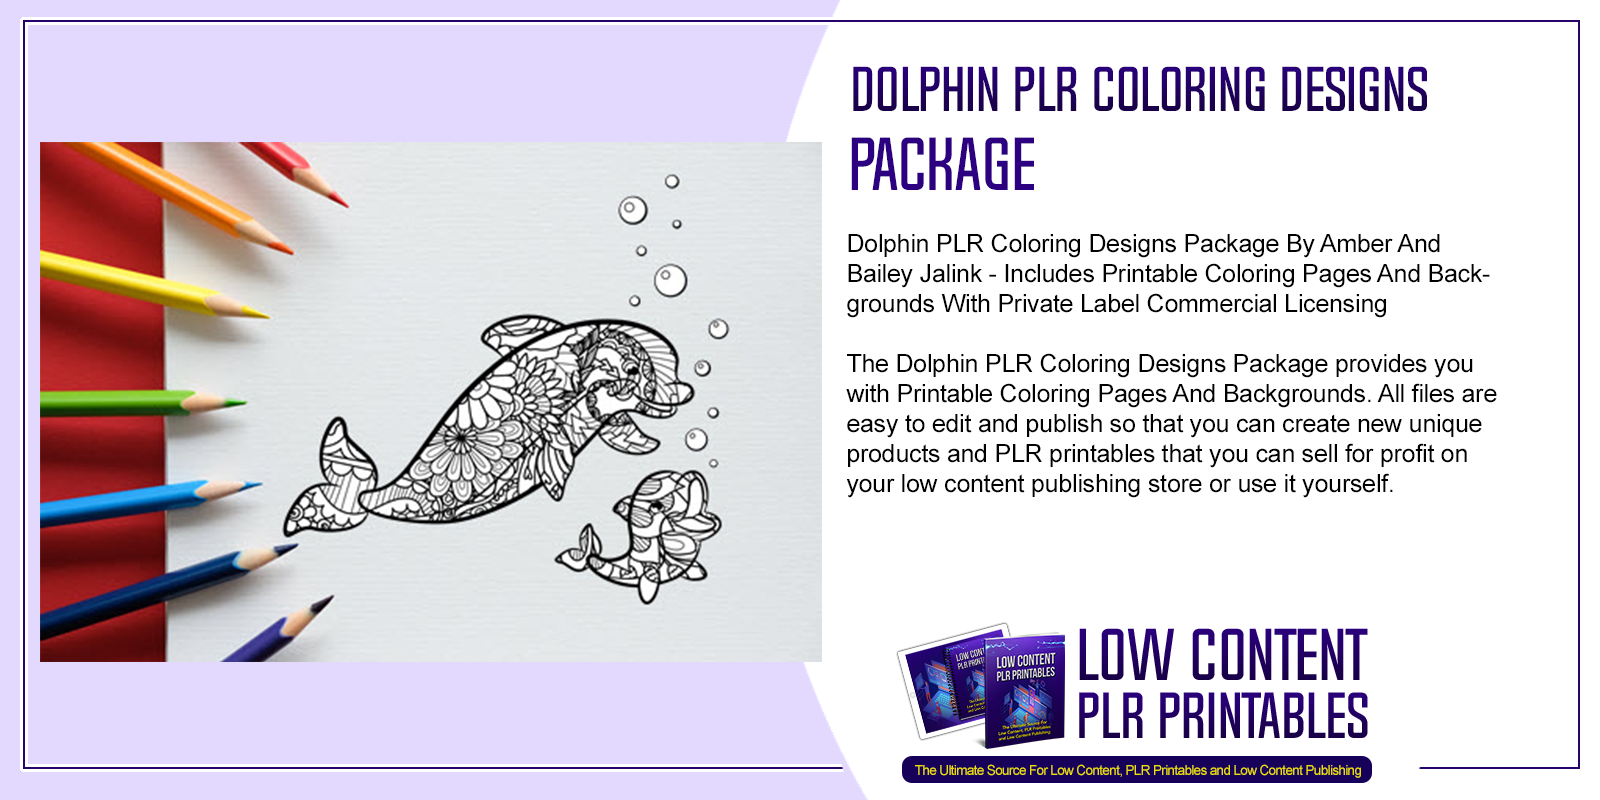 Dolphin PLR Coloring Designs Package